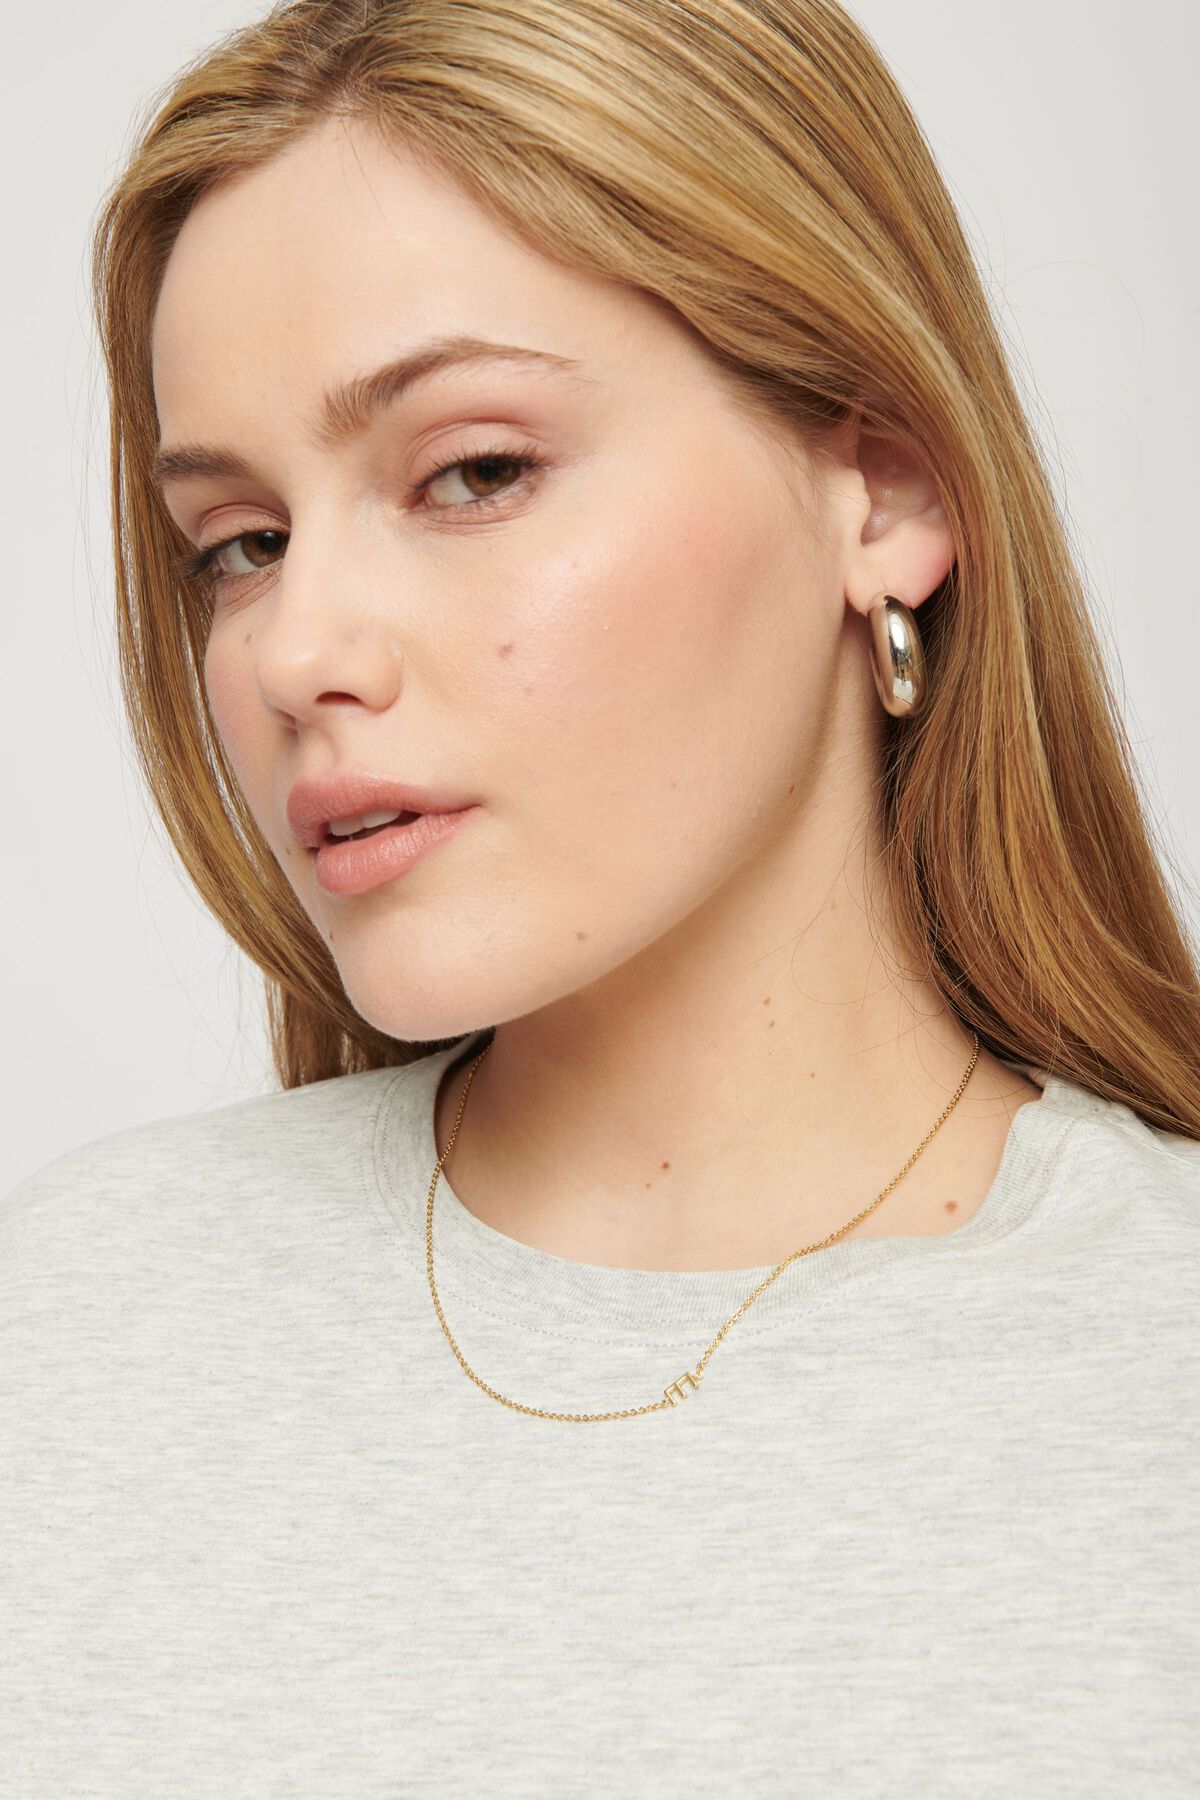 Garage 14K Gold Plated Initial Necklace. 1